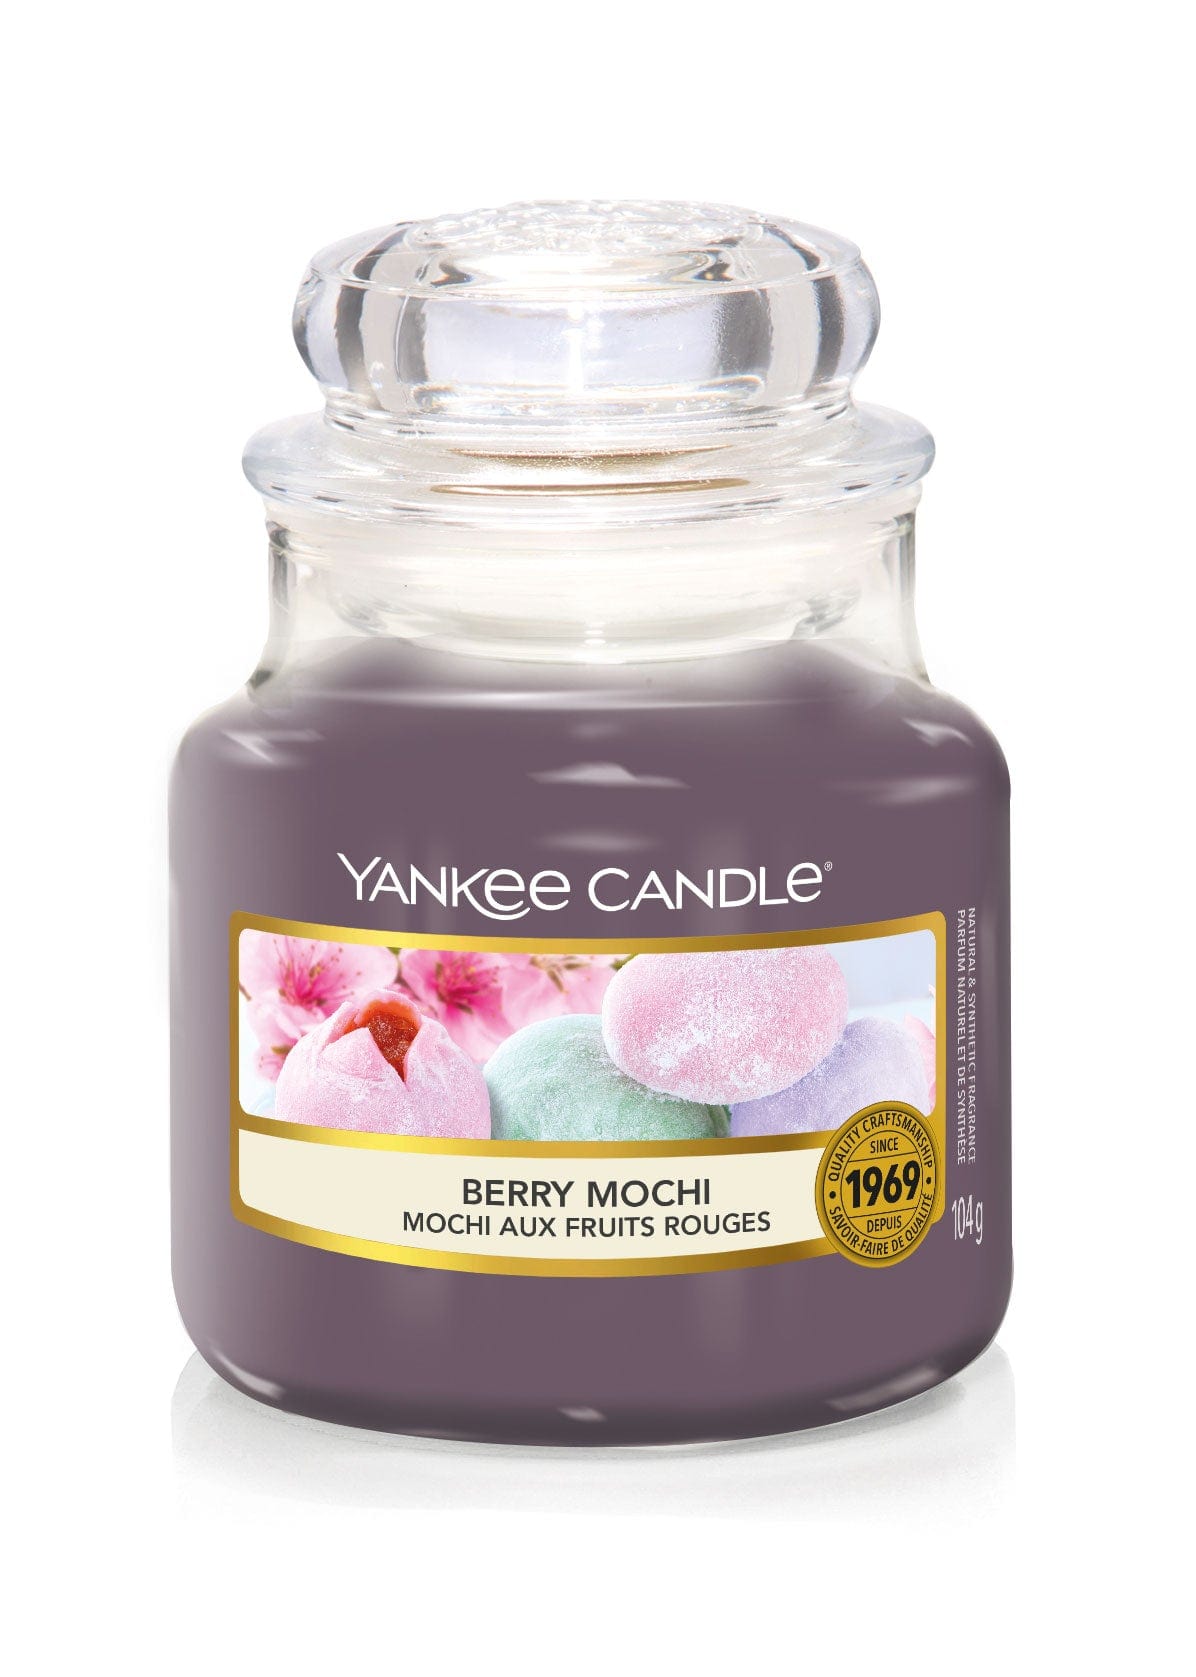 Yankee Candle Small Jar Candle Yankee Candle Small Jar - Berry Mochi